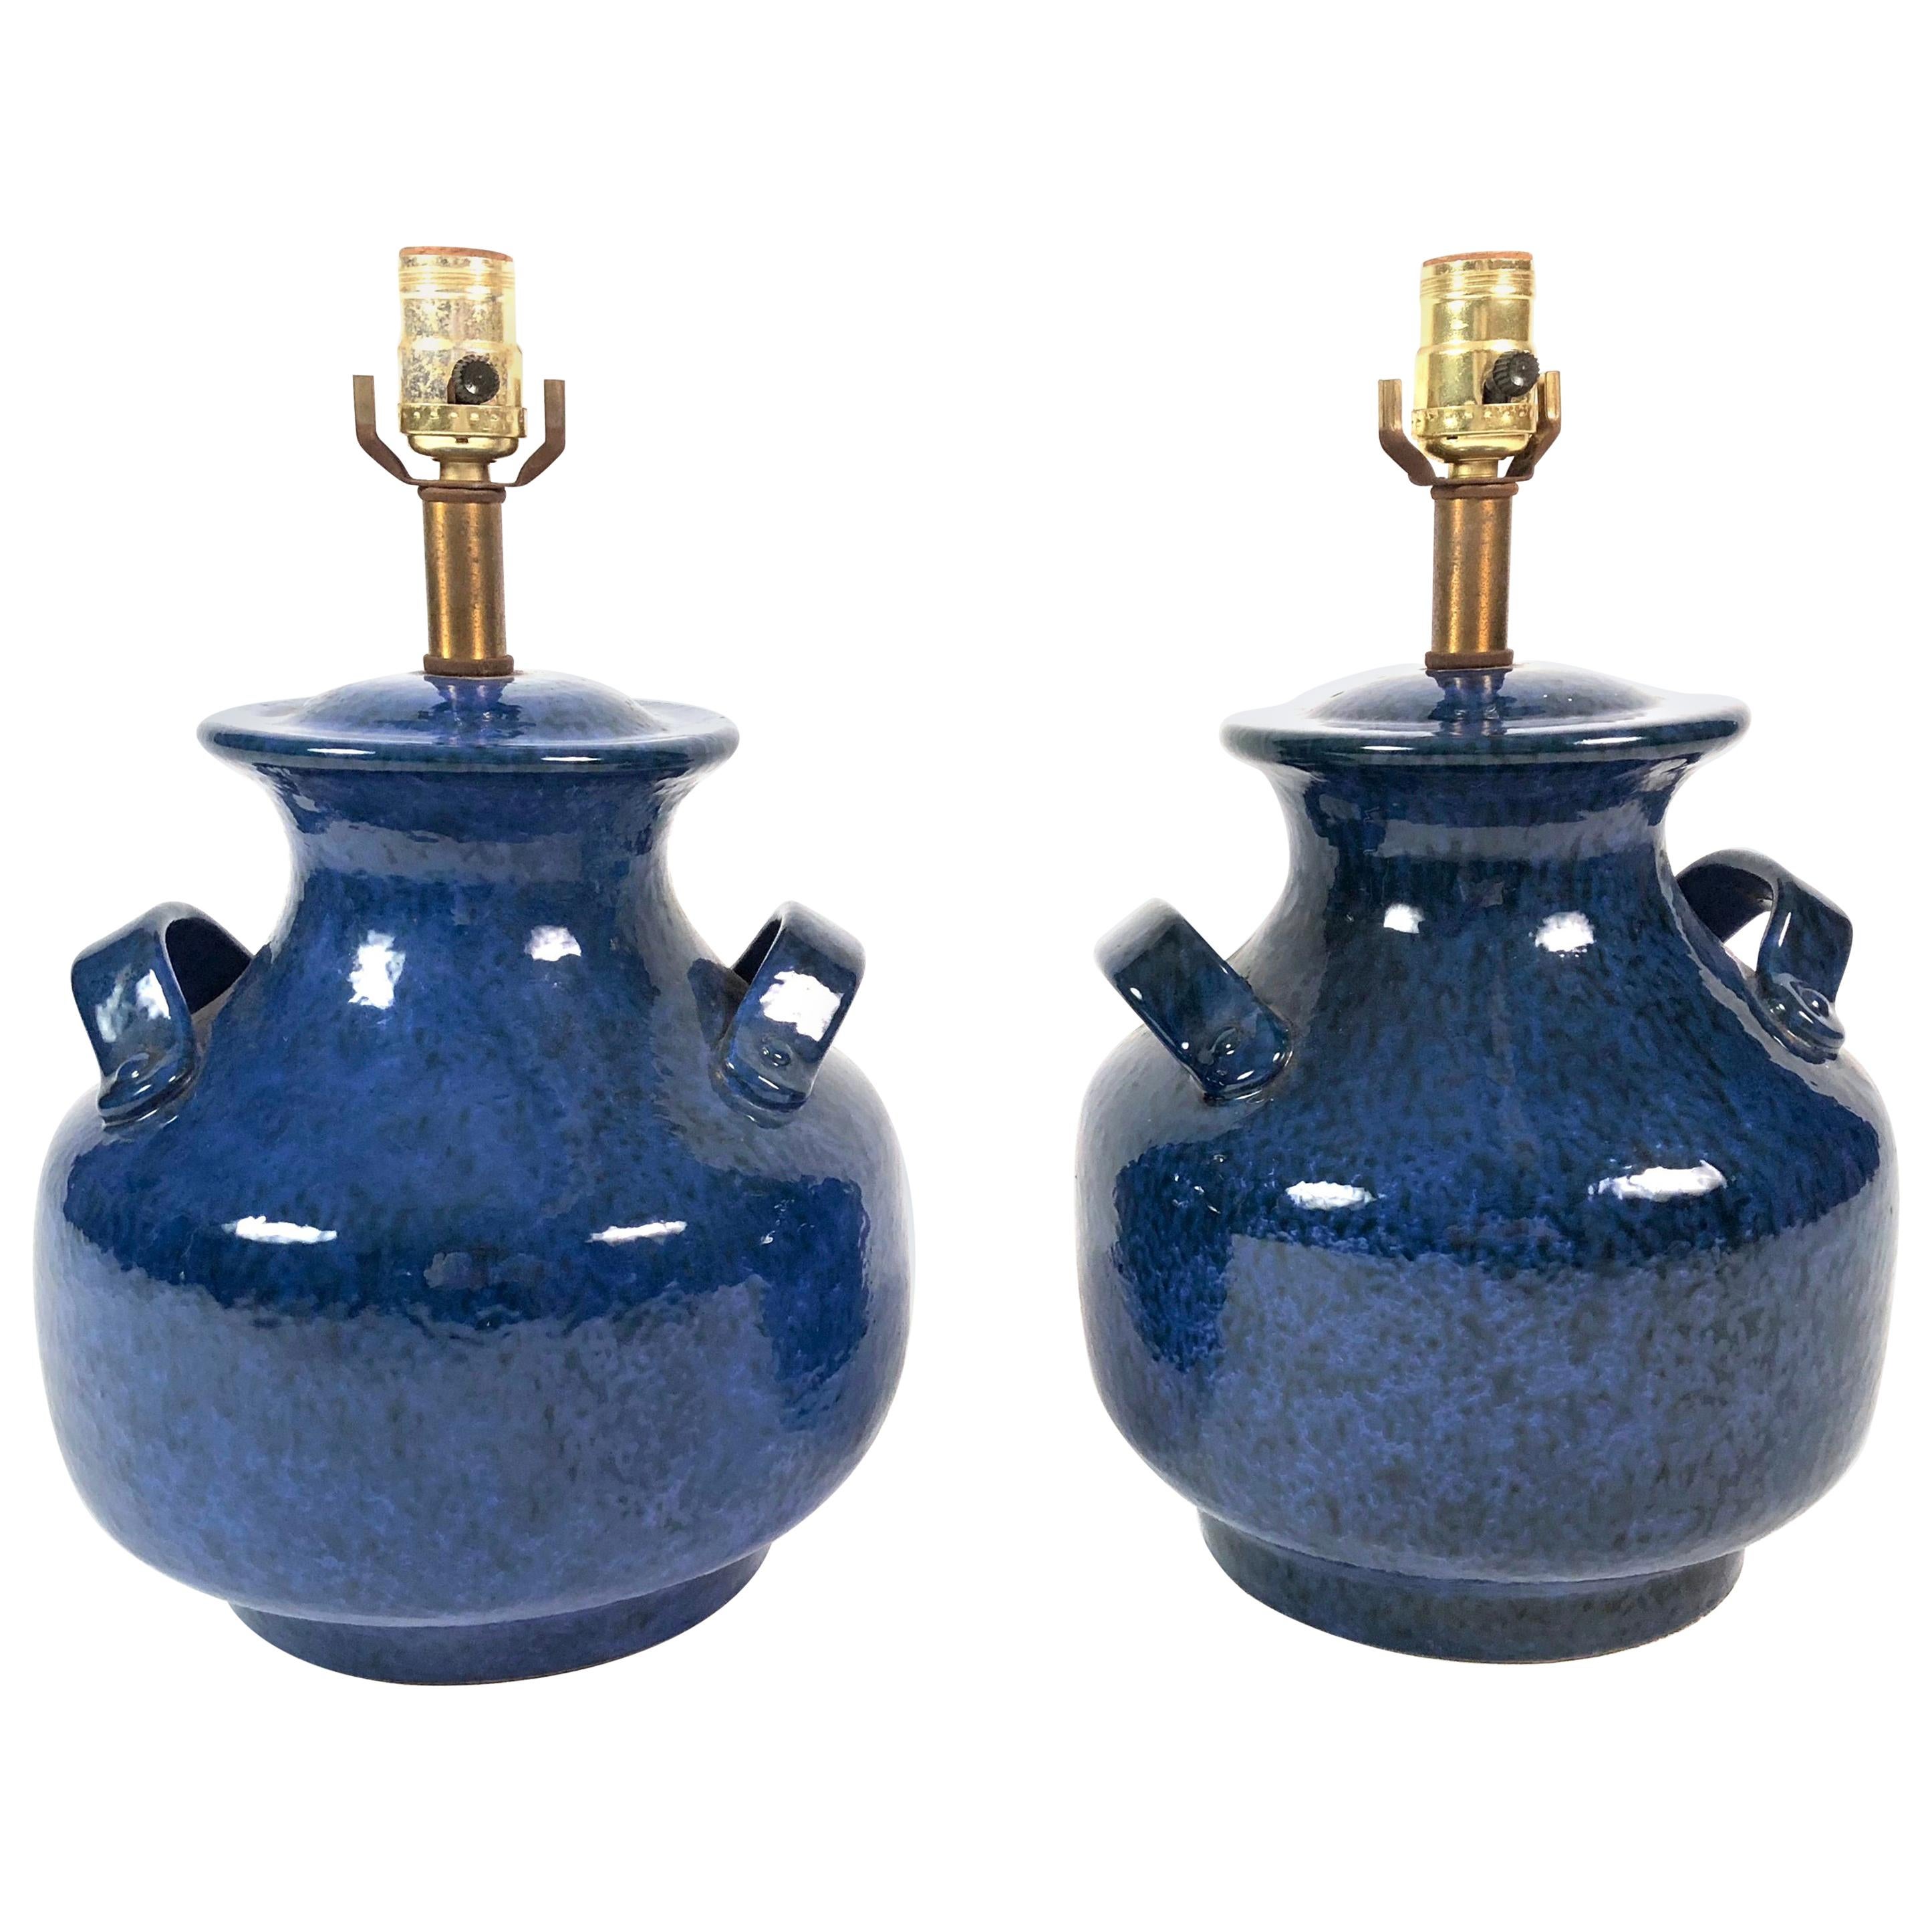 A pair of vintage Italian mottled blue glazed pottery lamps in the form of vases with strap handles on the shoulders, with brass neck. Overall height to top of shade (seen in last photo) is 24